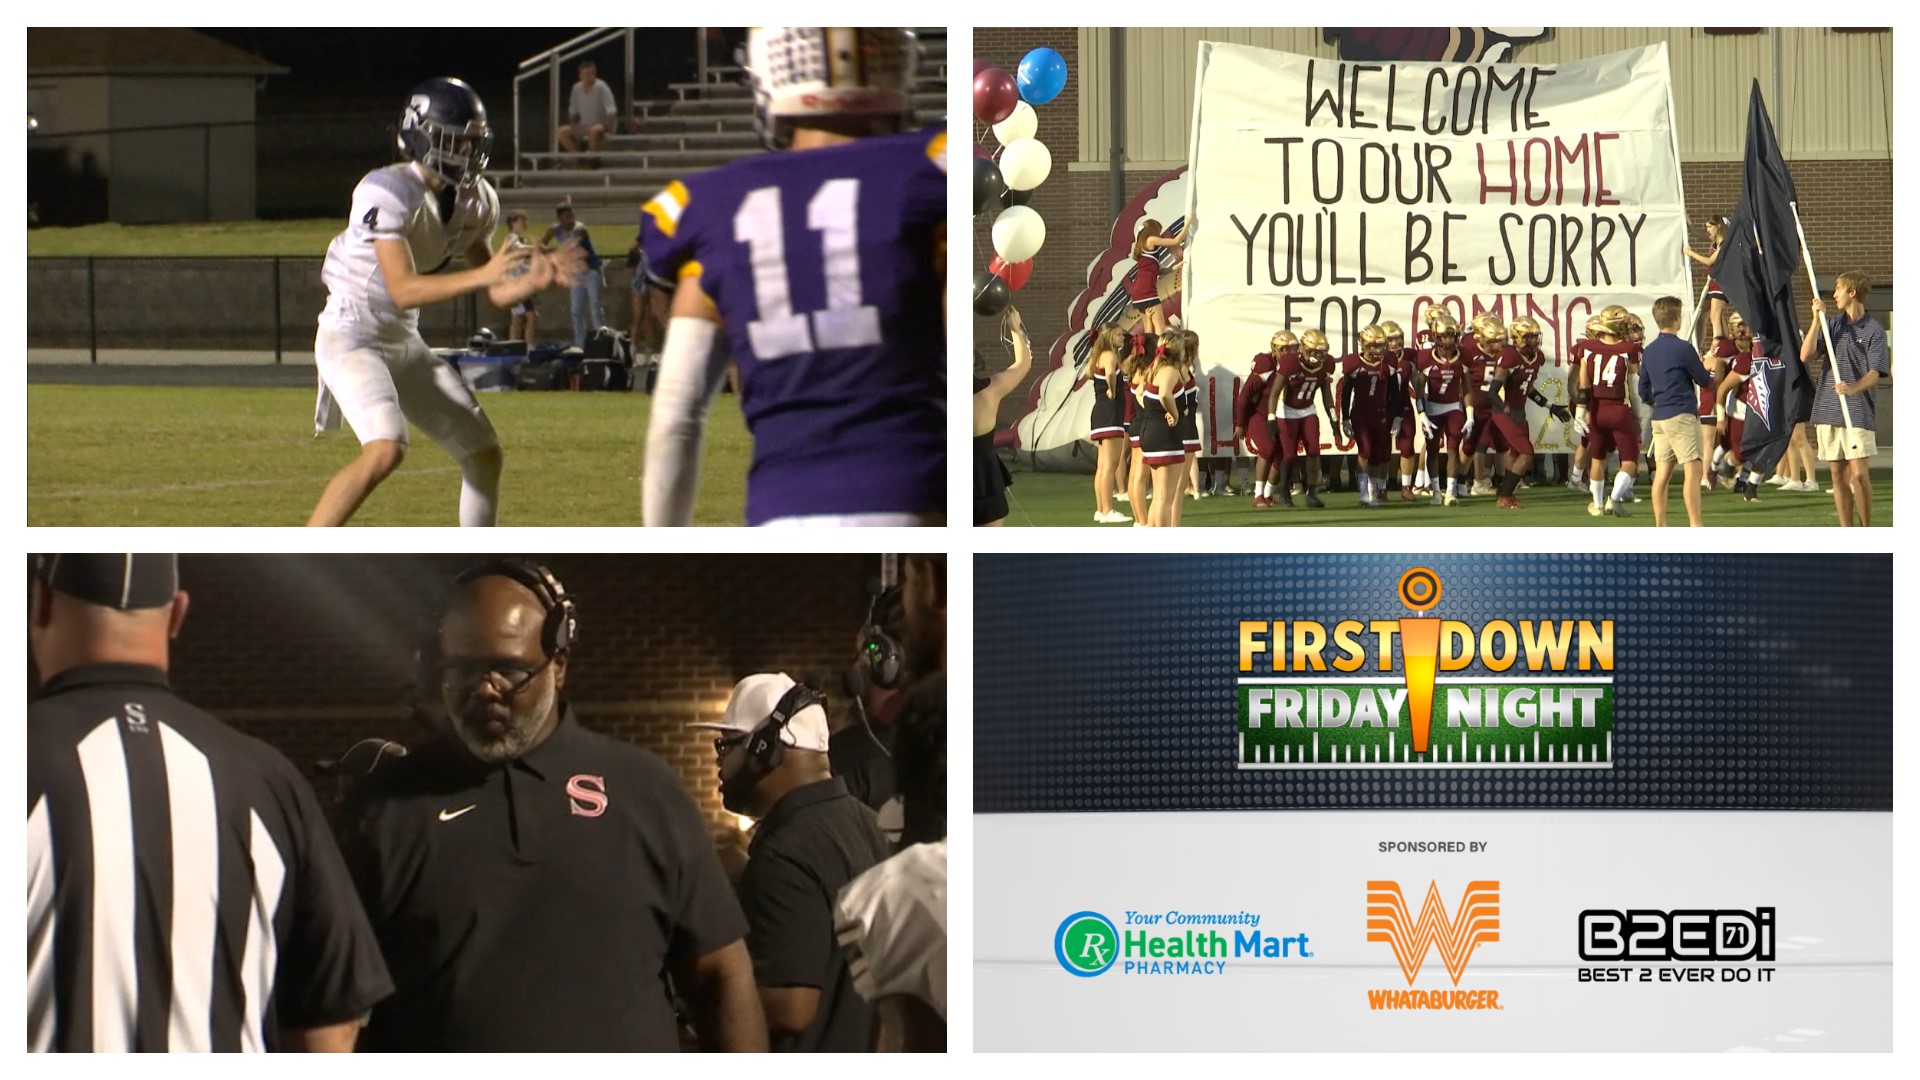 Key positioning in region play continued during week 4 of the season. We captured & displayed scores & highlights on the latest edition of First Down Friday Night